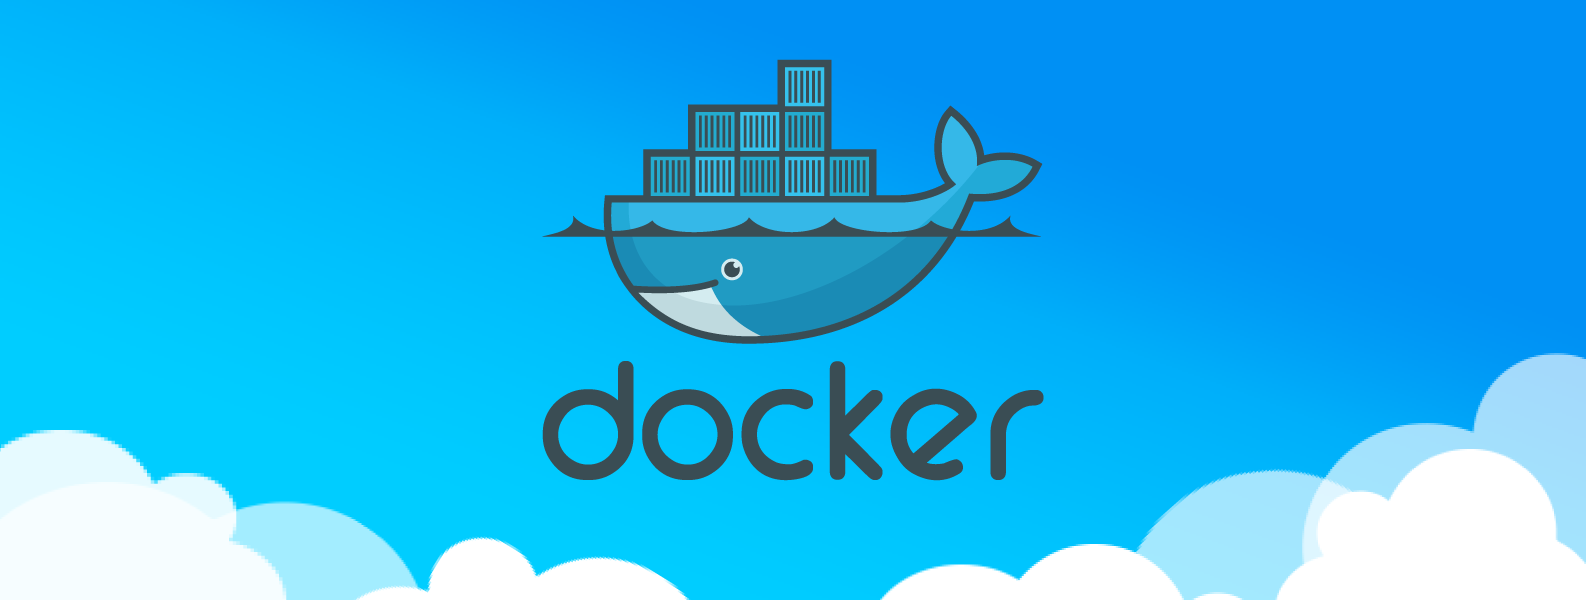 What exactly are containers and what is Docker?